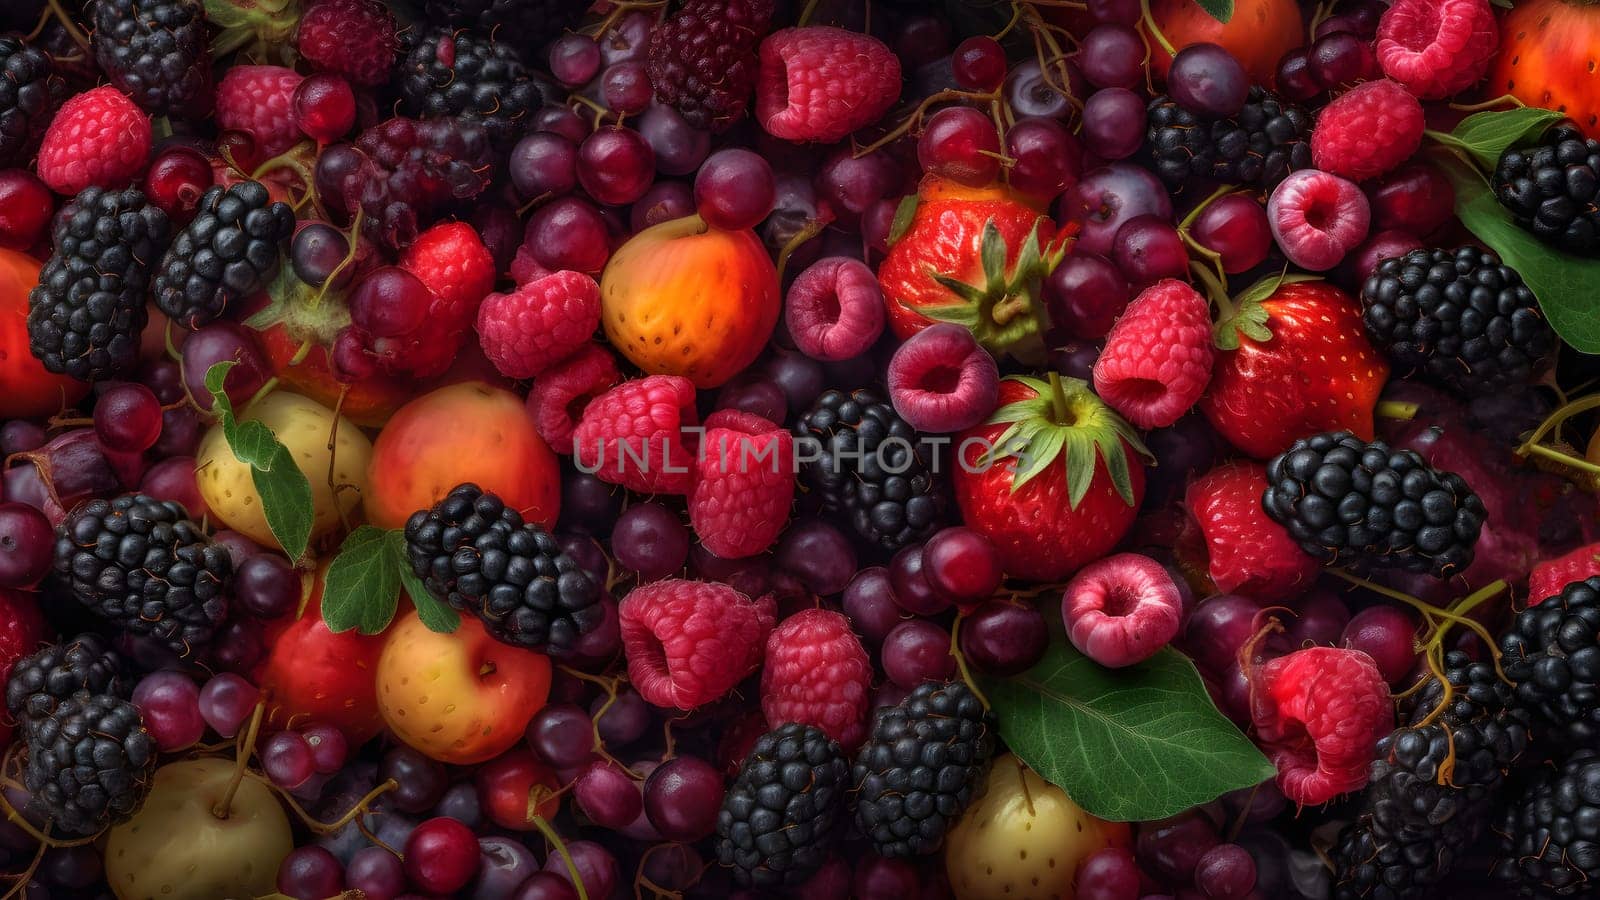 Berry mix photorealistic colorful full-frame closeup high angle view background, neural network generated image by z1b